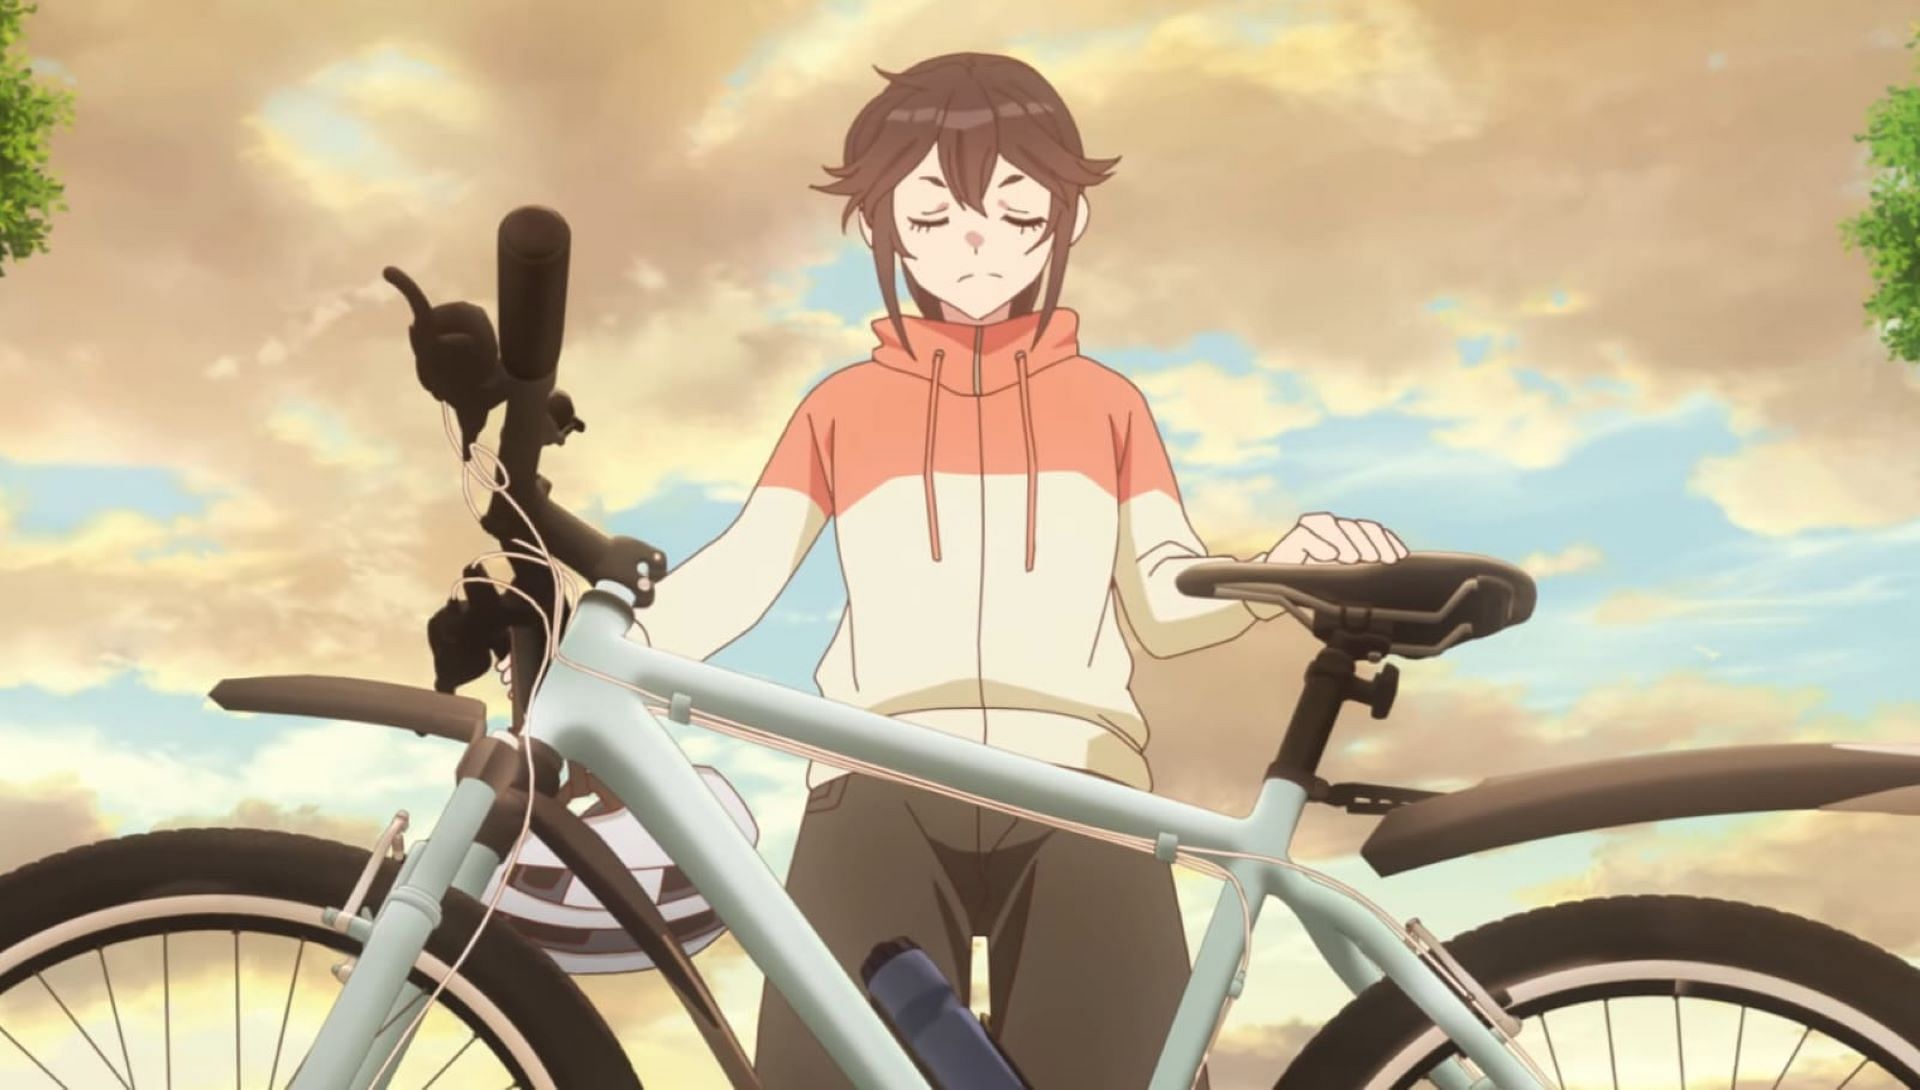 Bicycle Frames Cycling Motorcycle Anime, ride on a bicycle, bicycle Frame,  manga png | PNGEgg